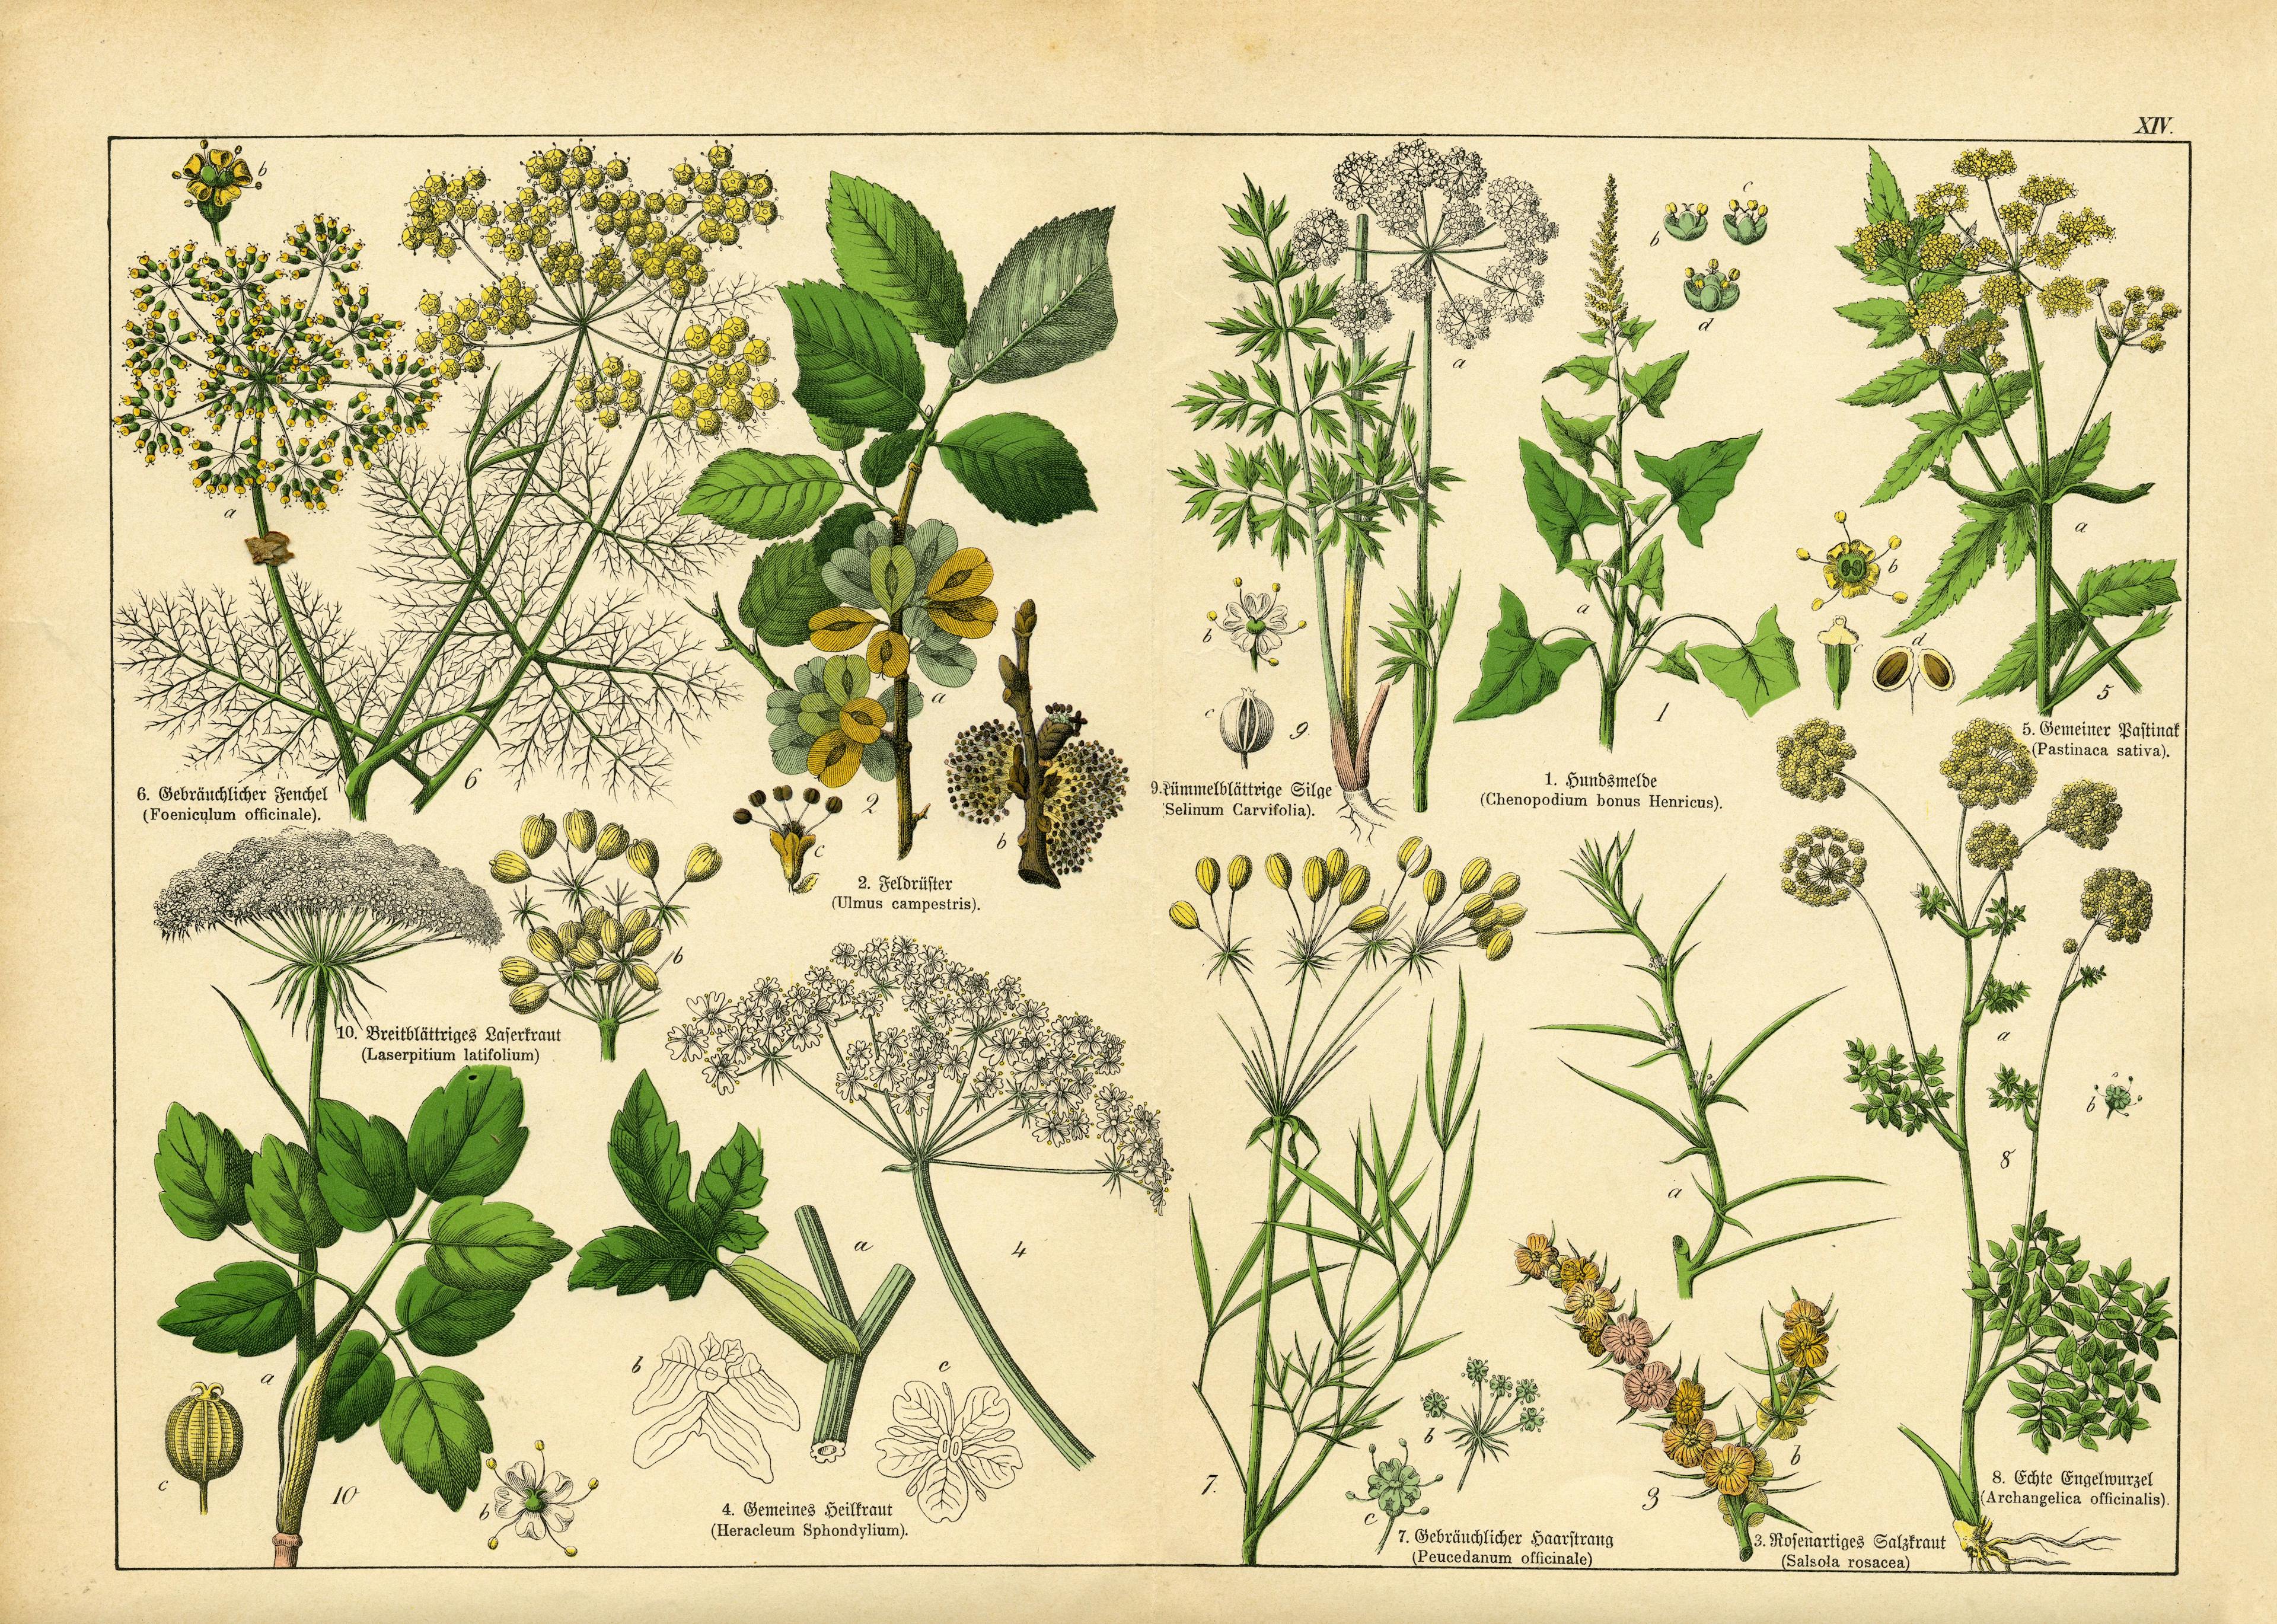 A sheet of antique botanical lithography of the 1890s-1900s with images of plants